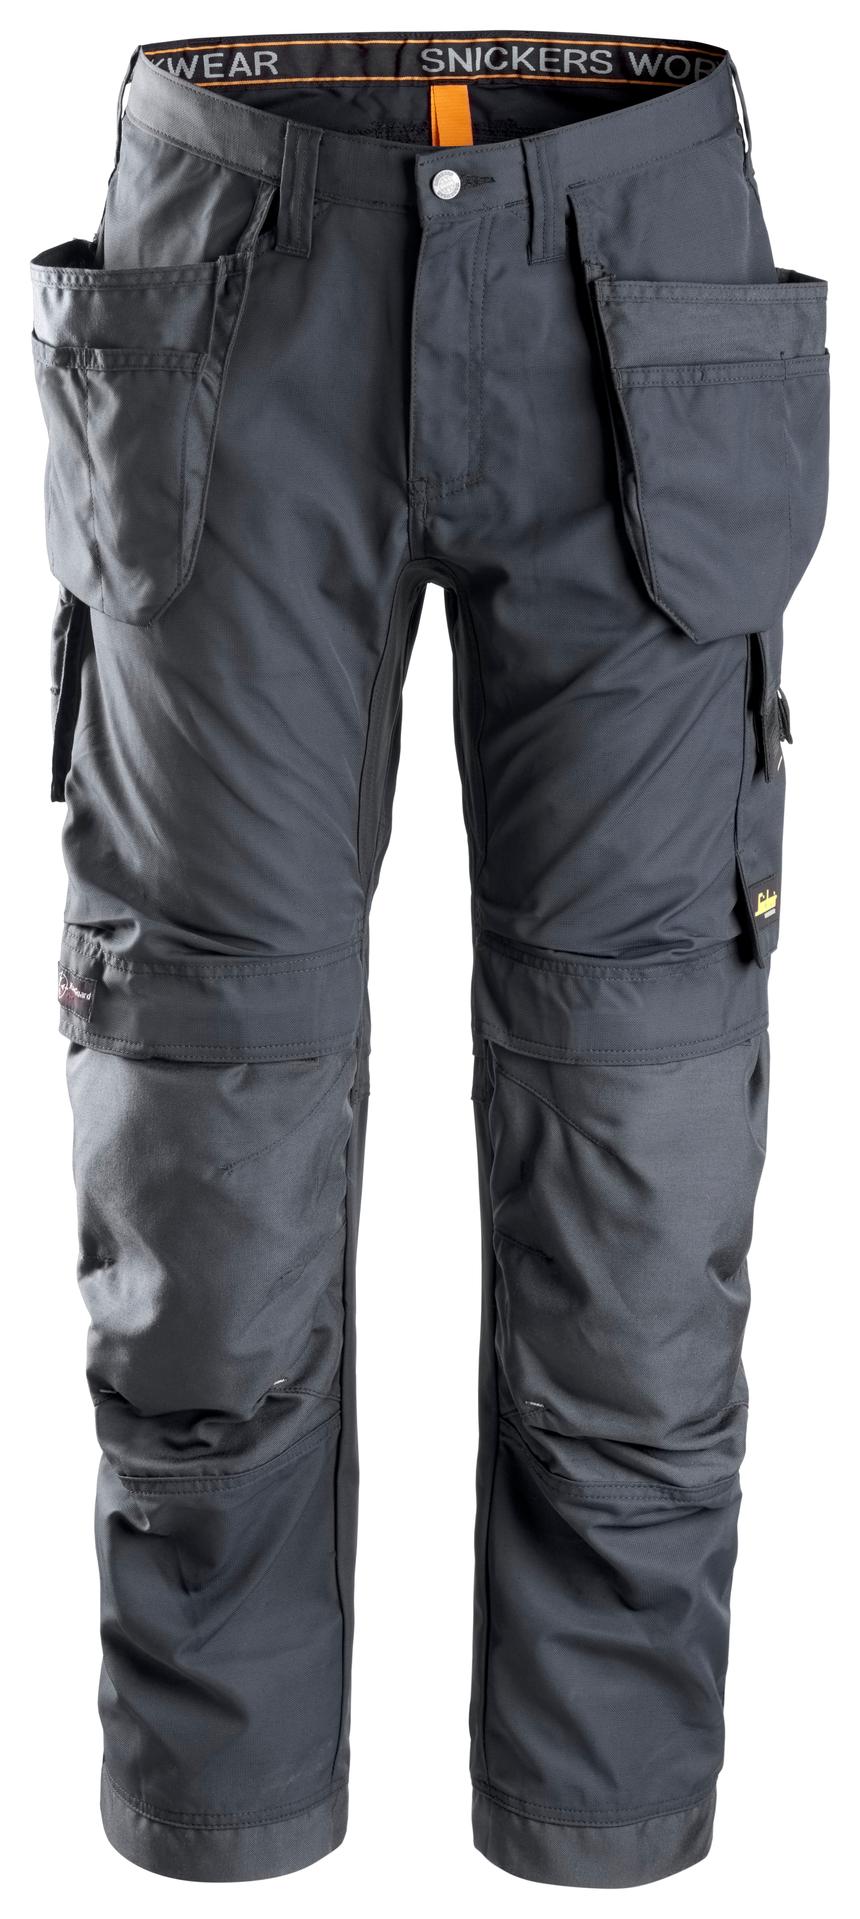 Snickers 6201 Allround Work Trousers with Holster Pockets | DEL Workwear